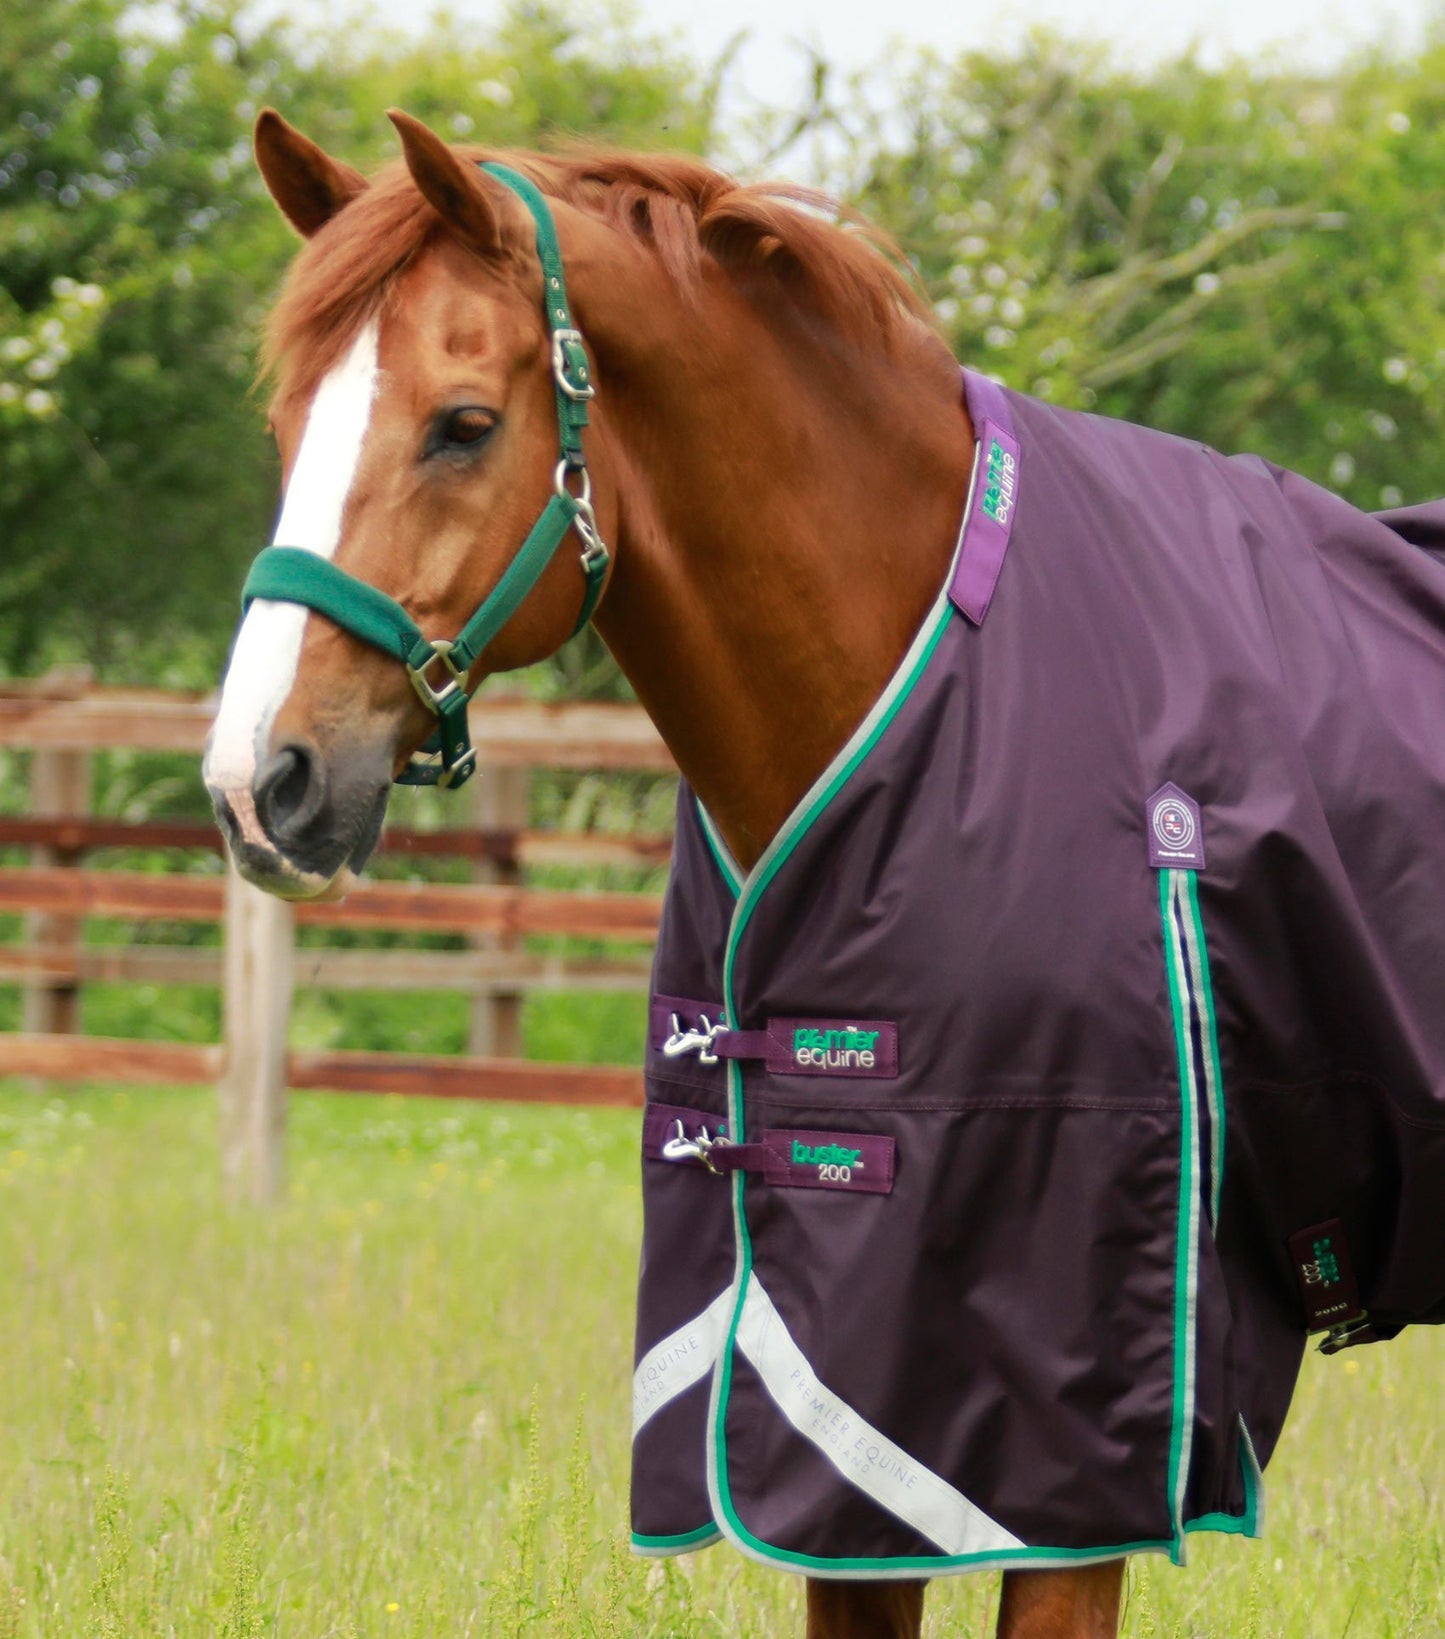 Premier Equine Buster 200g Turnout Rug with Snug Fit Neck Cover